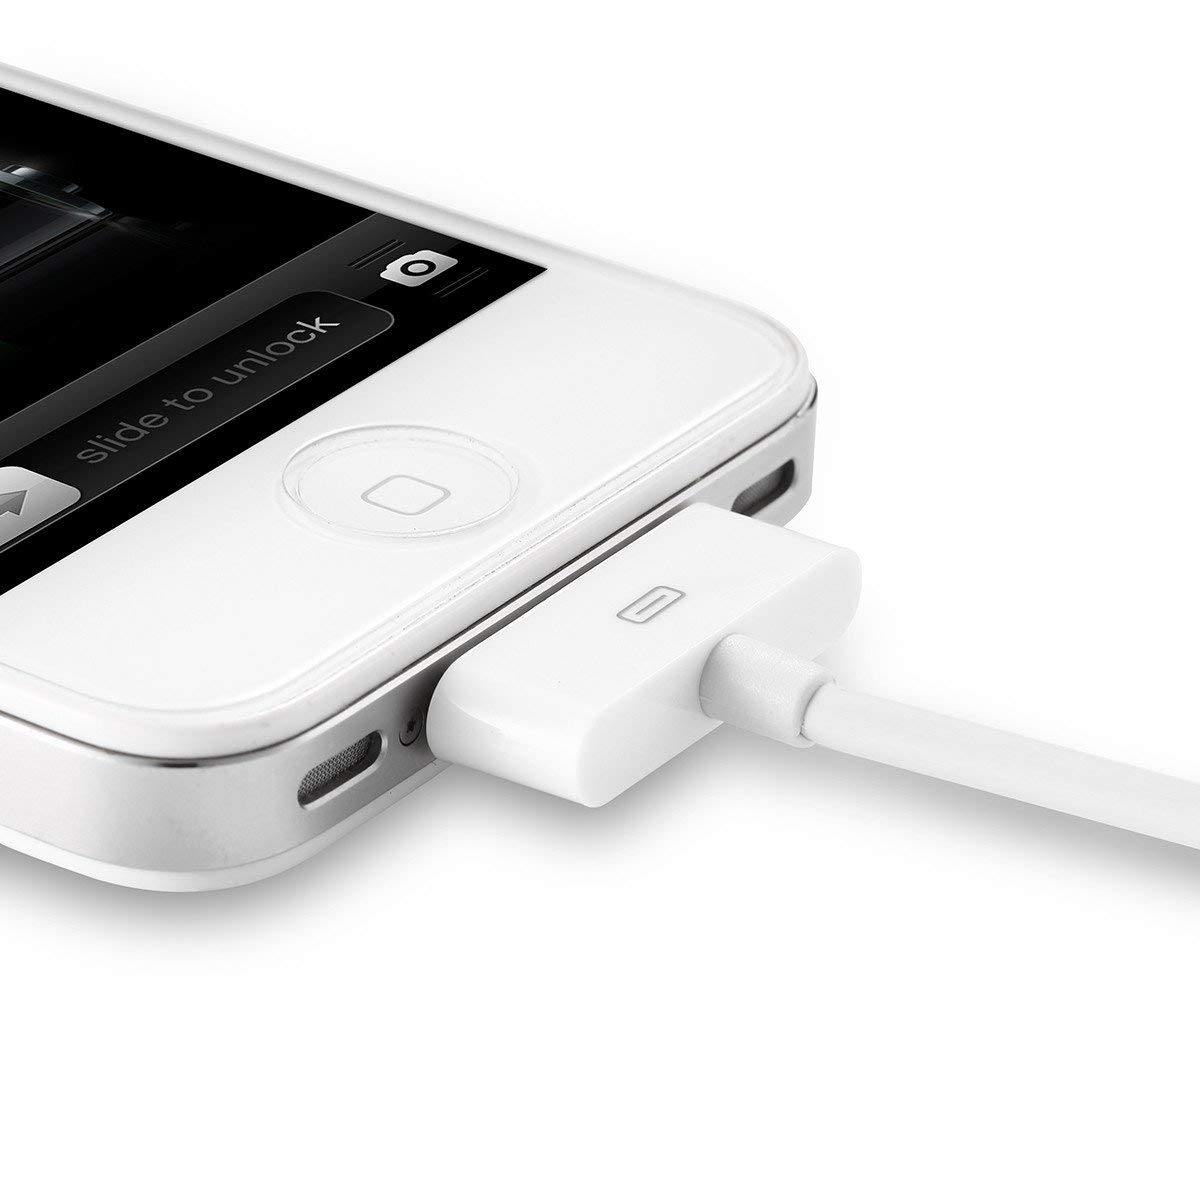 Aibocn MFi Certified 30 Pin Sync and Charge Dock Cable for iPhone 4 4S / iPad 1 2 3 / iPod Nano/iPod Touch - White